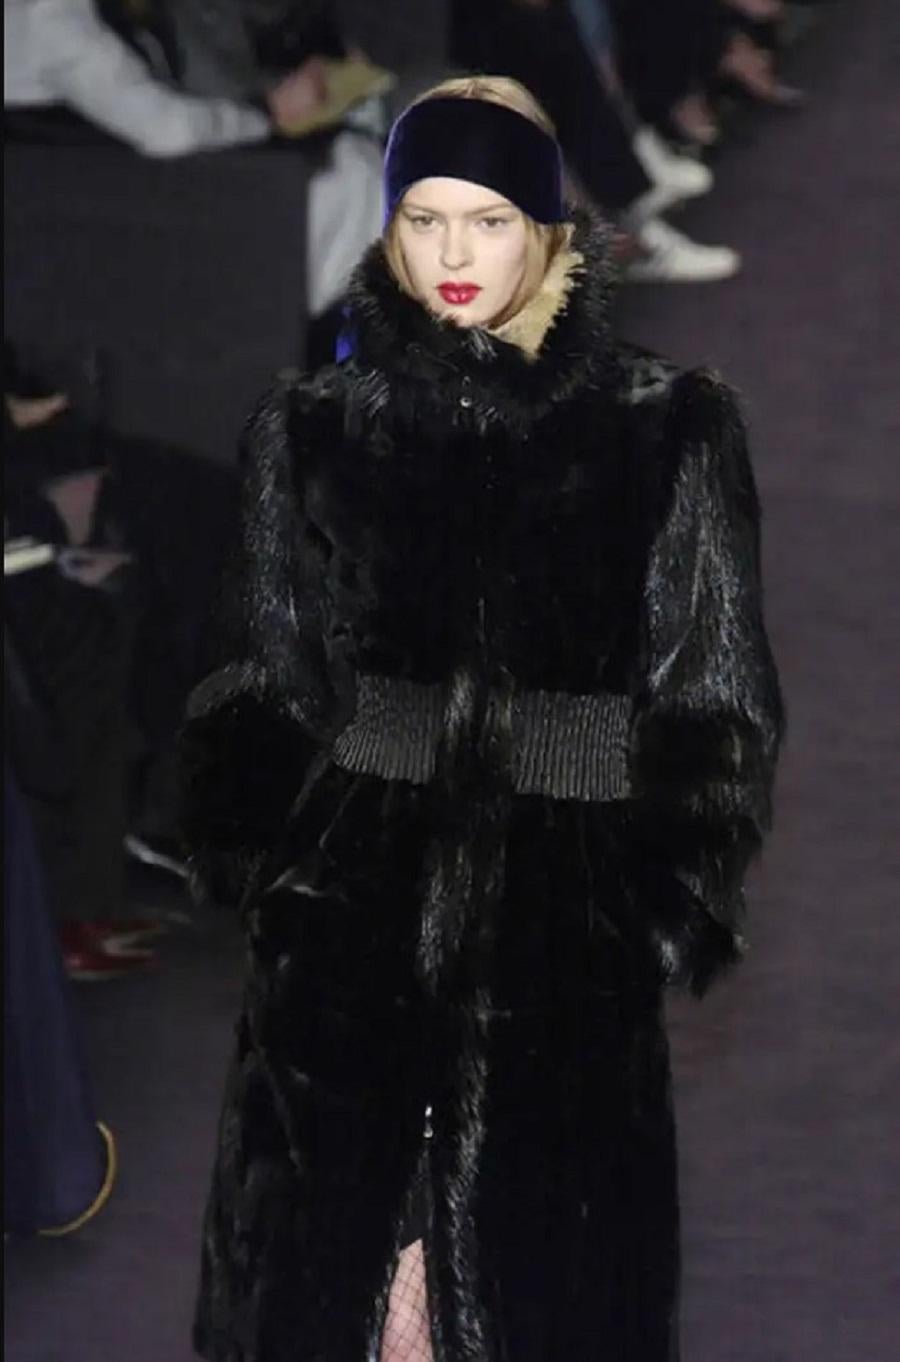 NWT Tom Ford for Yves Saint Laurent Rive Gauche Fur Coat
F/W Runway 2003
French size 38 - US 6 ( please check measurements )
Beaver and Fox Fur, Genuine Leather.
Black Color, Zip Closure, Side Pockets, Leather Details at Waist and Cuffs, Double Fur